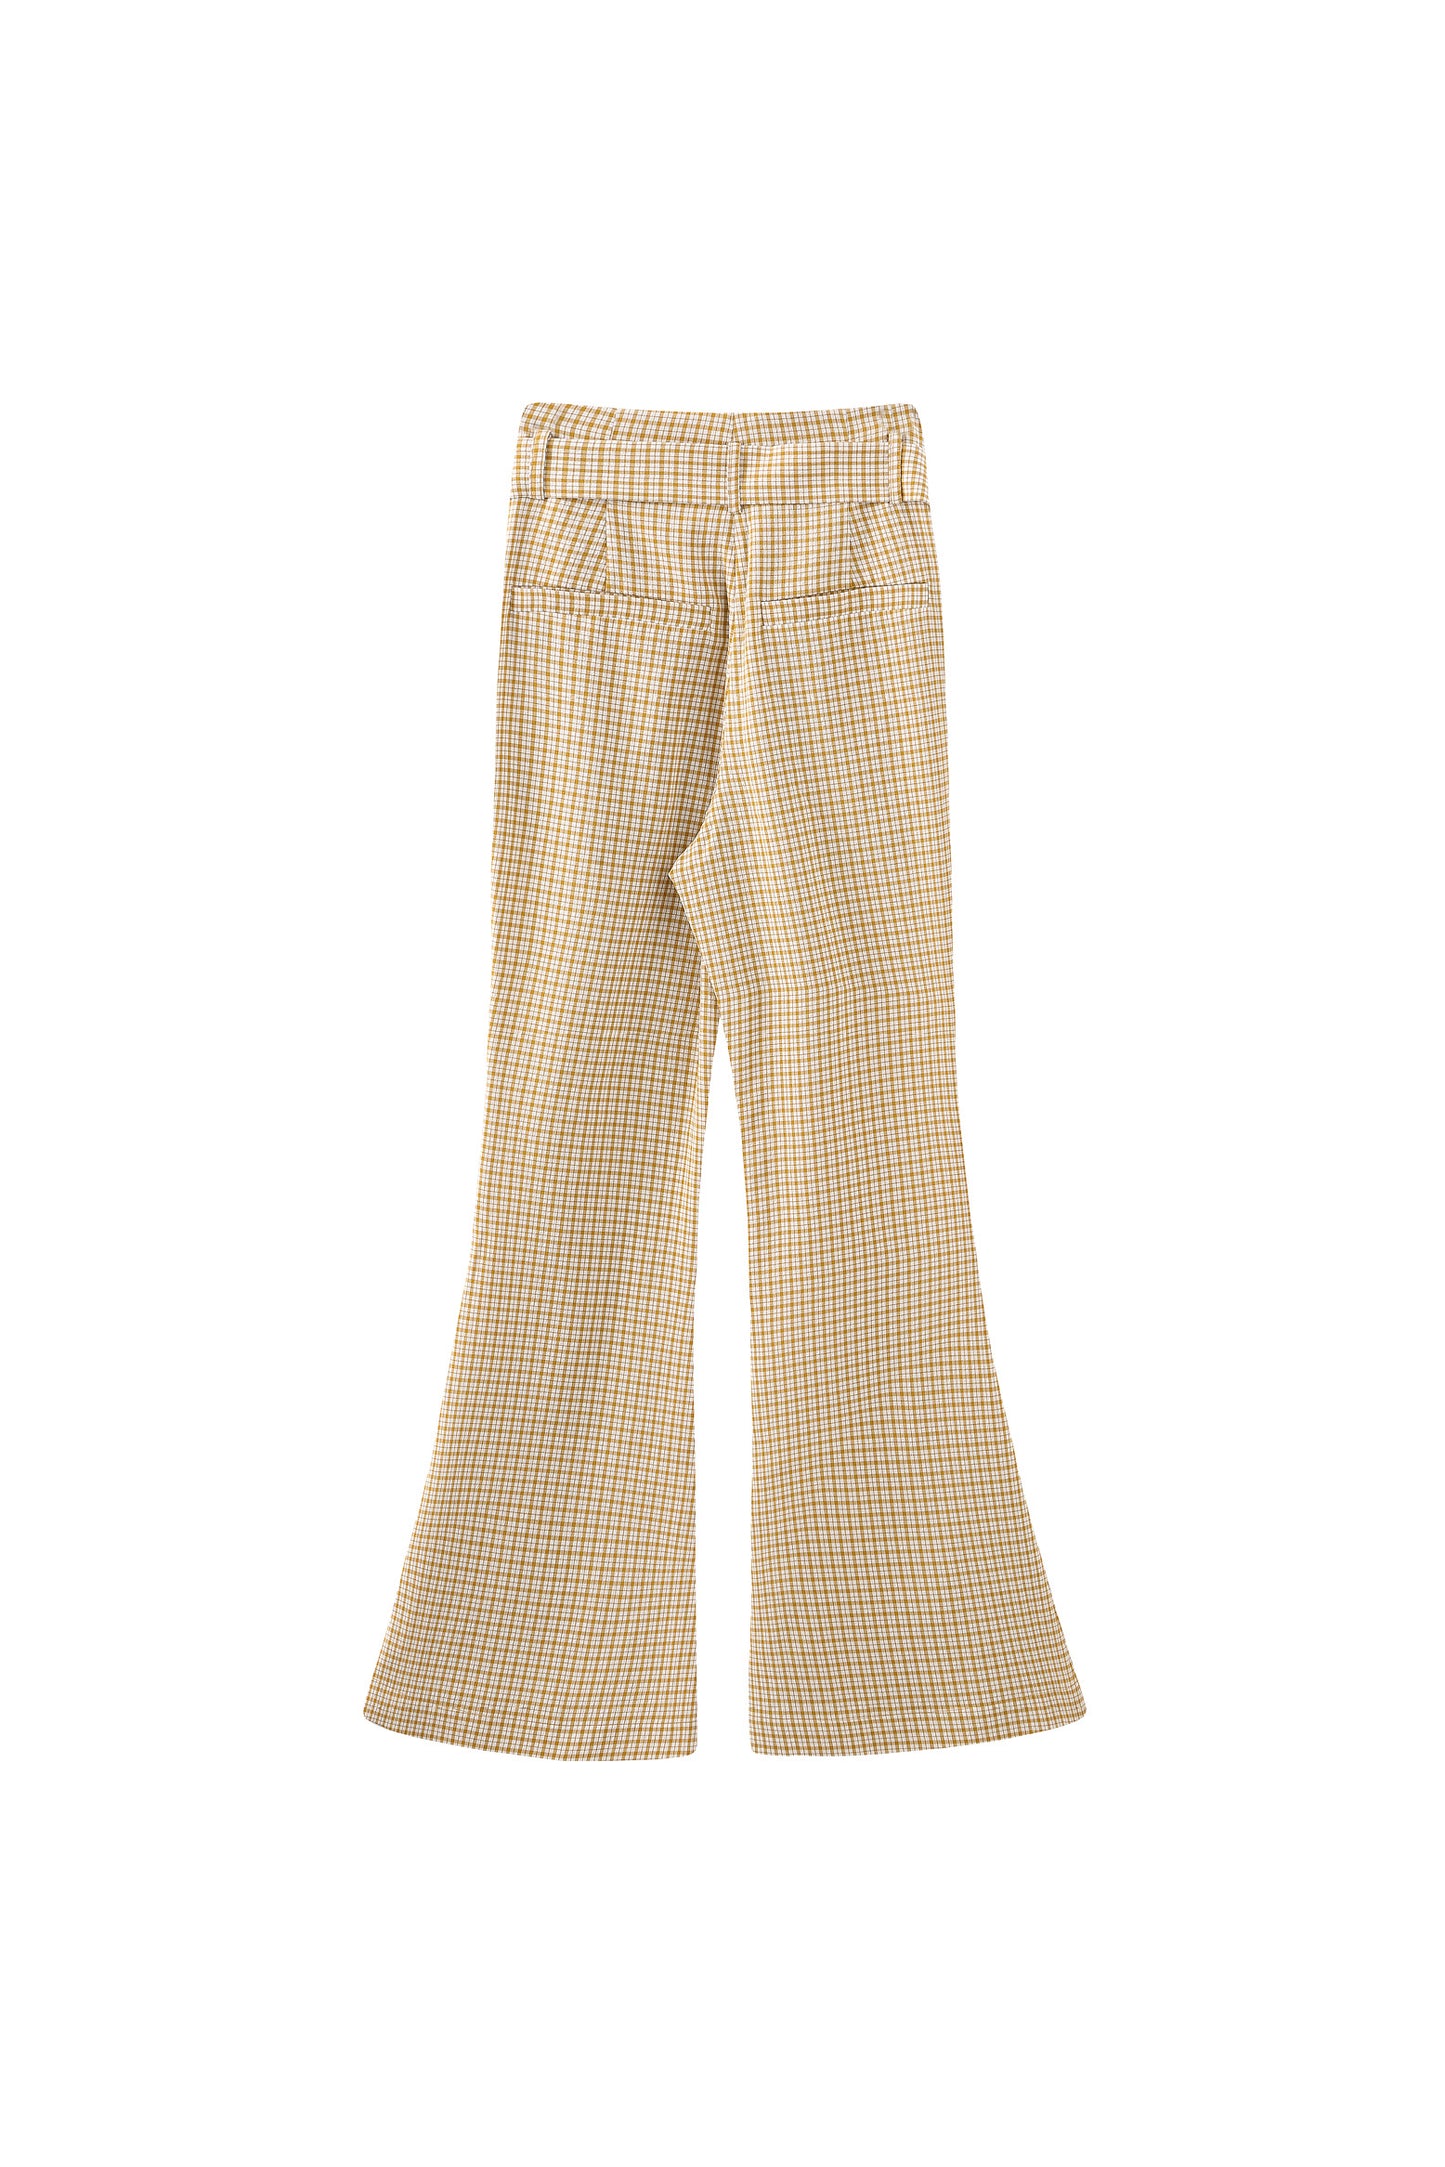 Patty Flare Trousers in Yellow Gingham